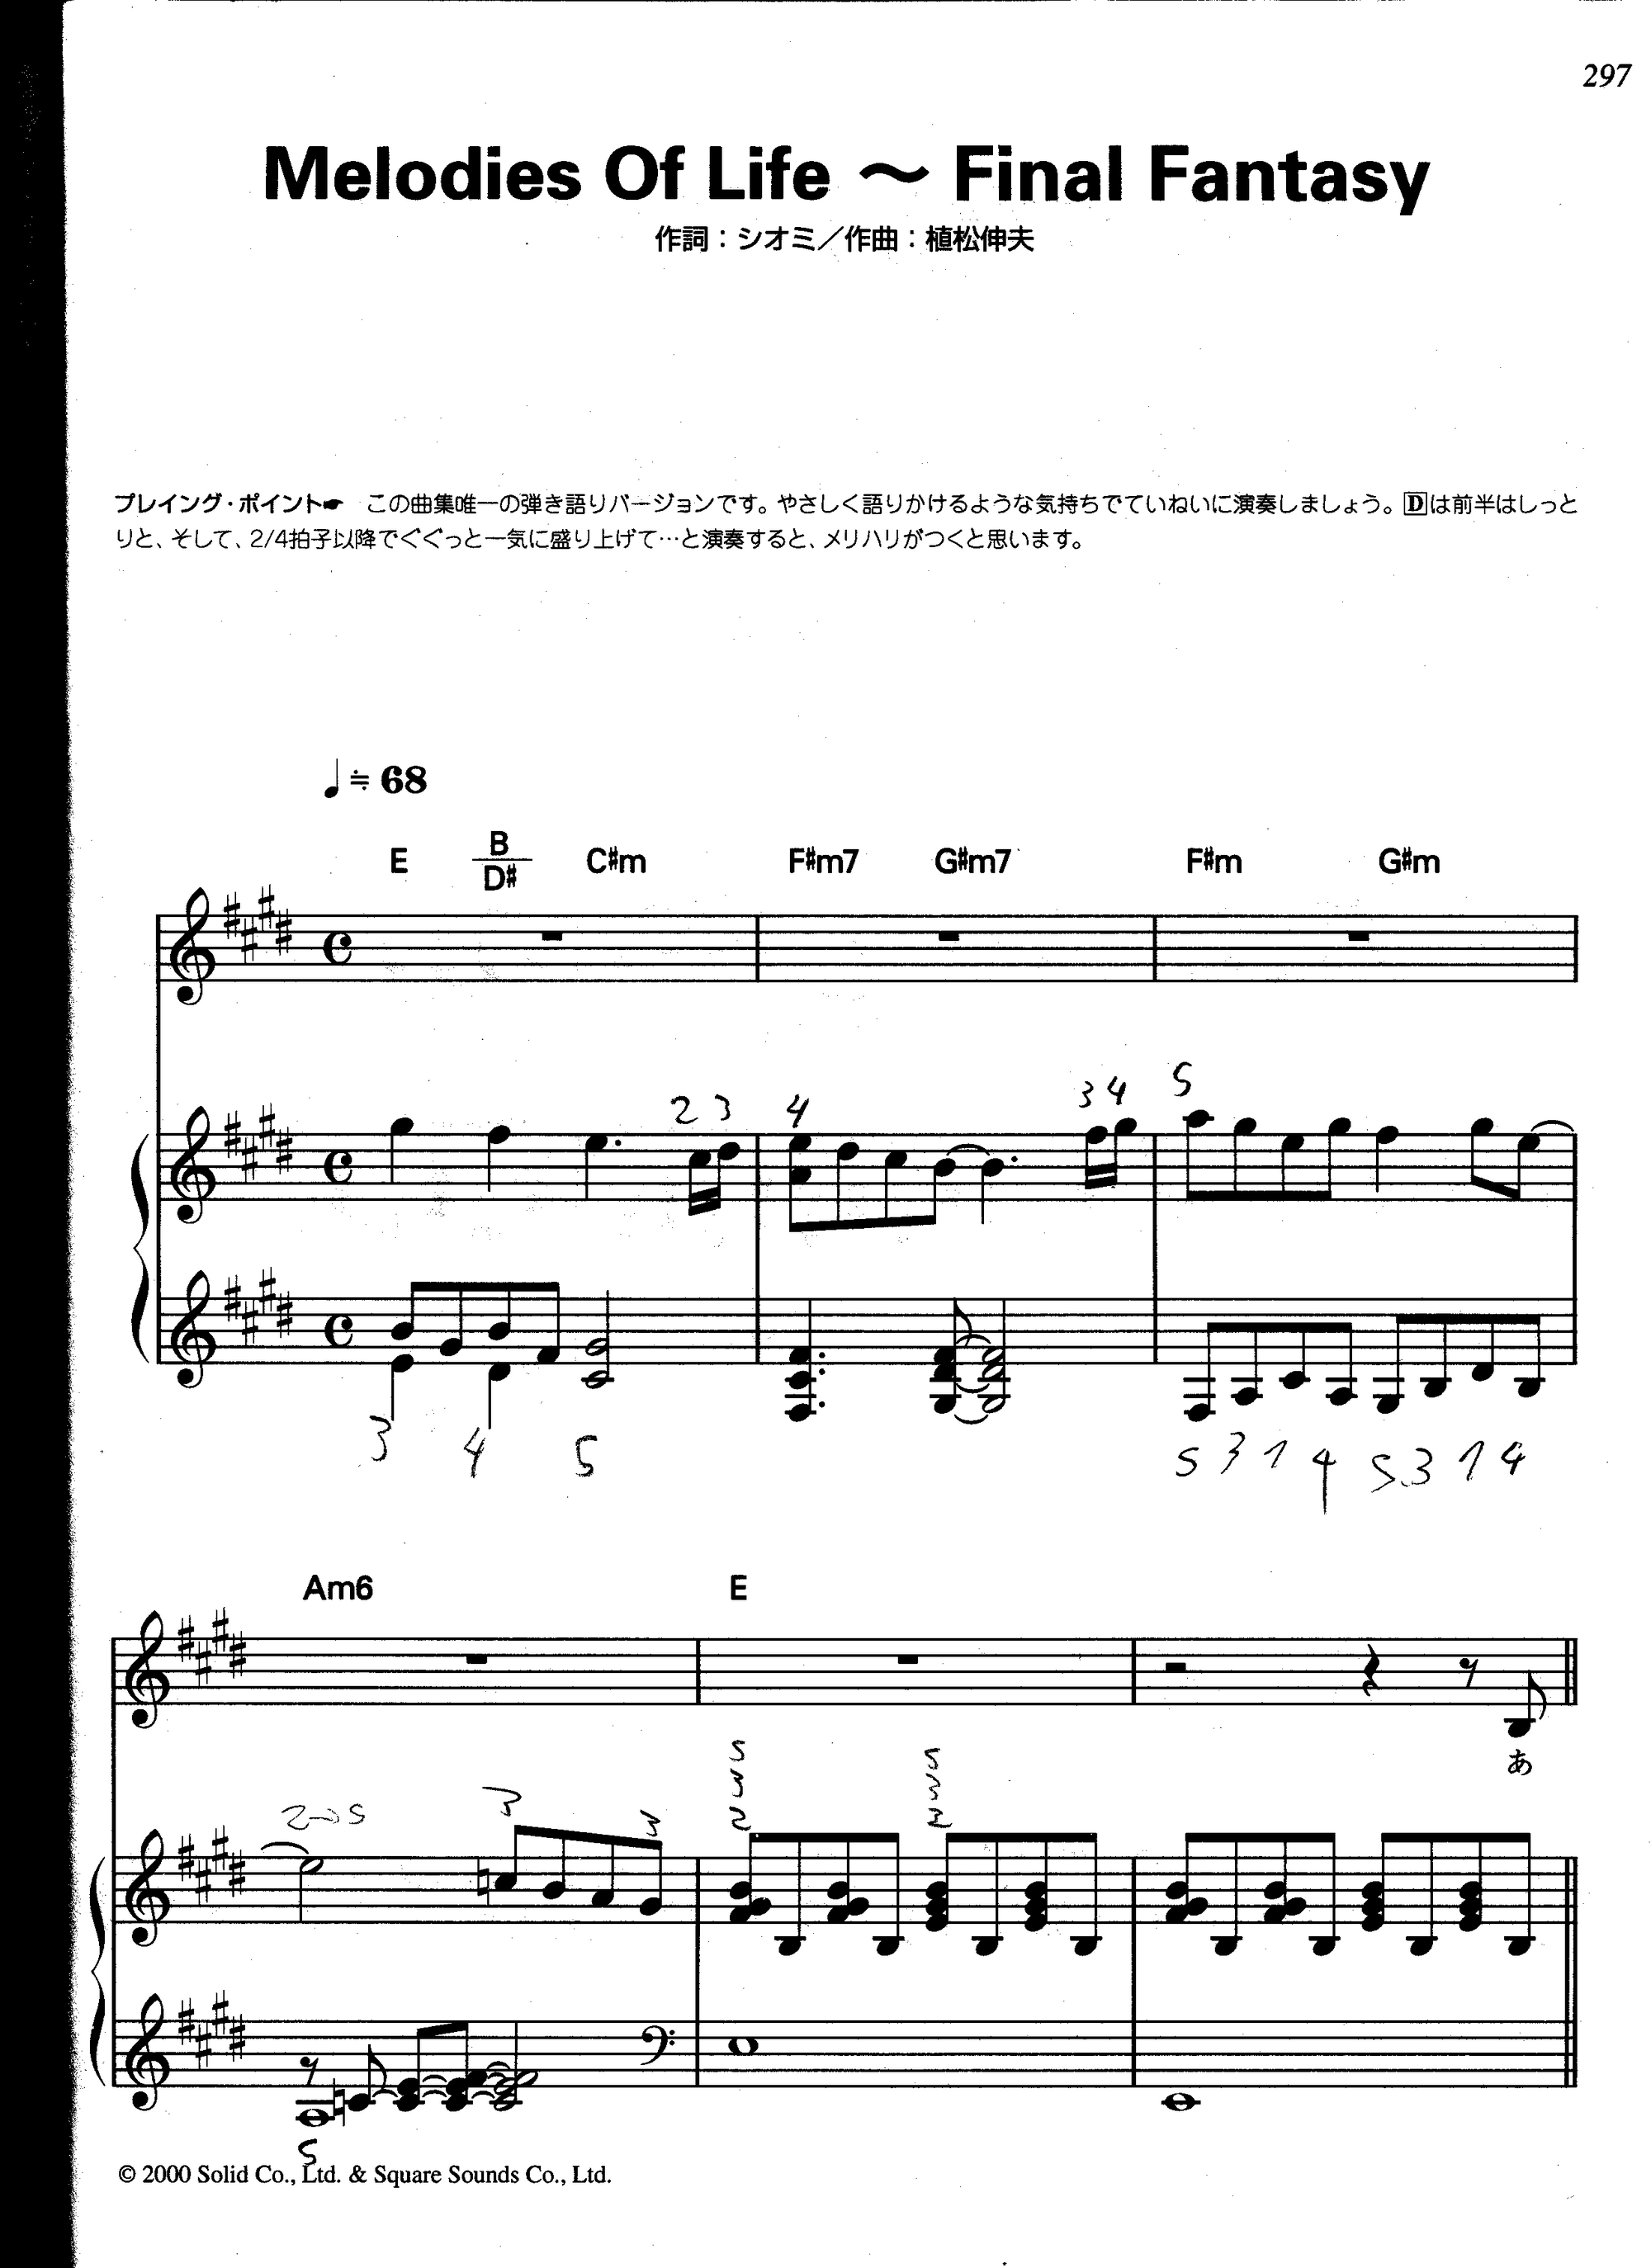 Melodies Of Life Song Final Fantasy Wiki Fandom